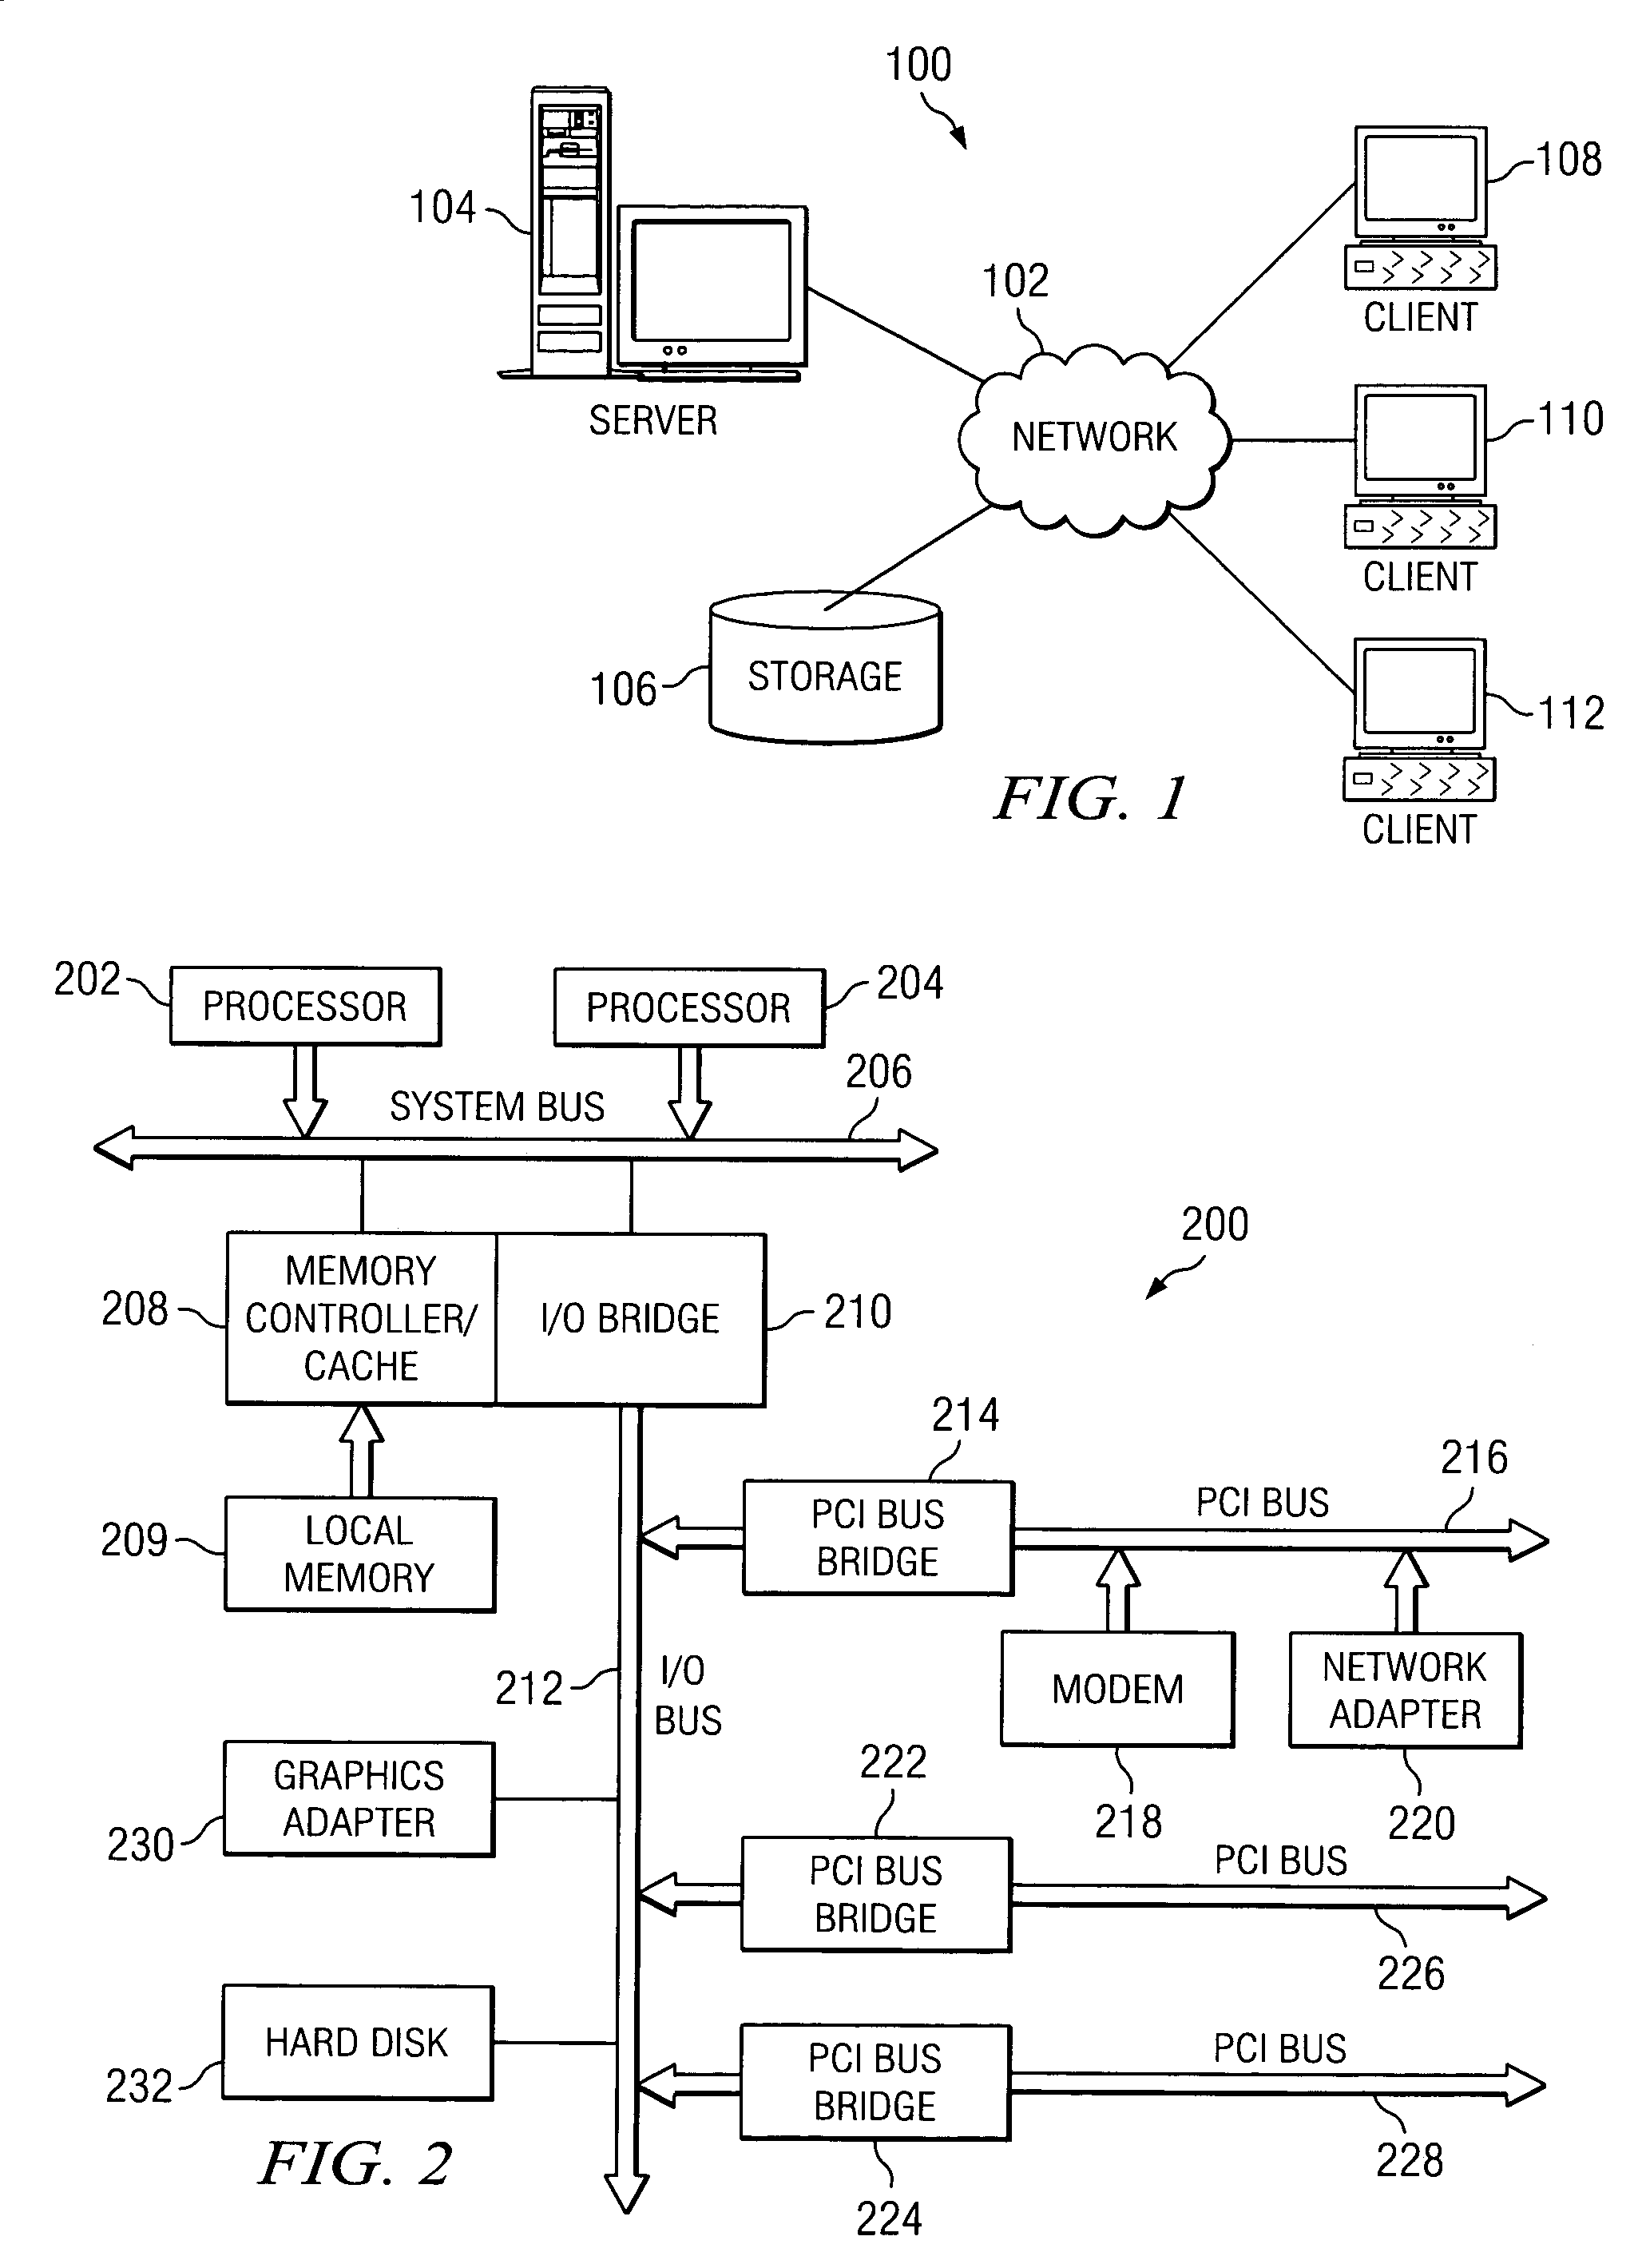 Apparatus and method for selecting a web service in response to a request from a client device